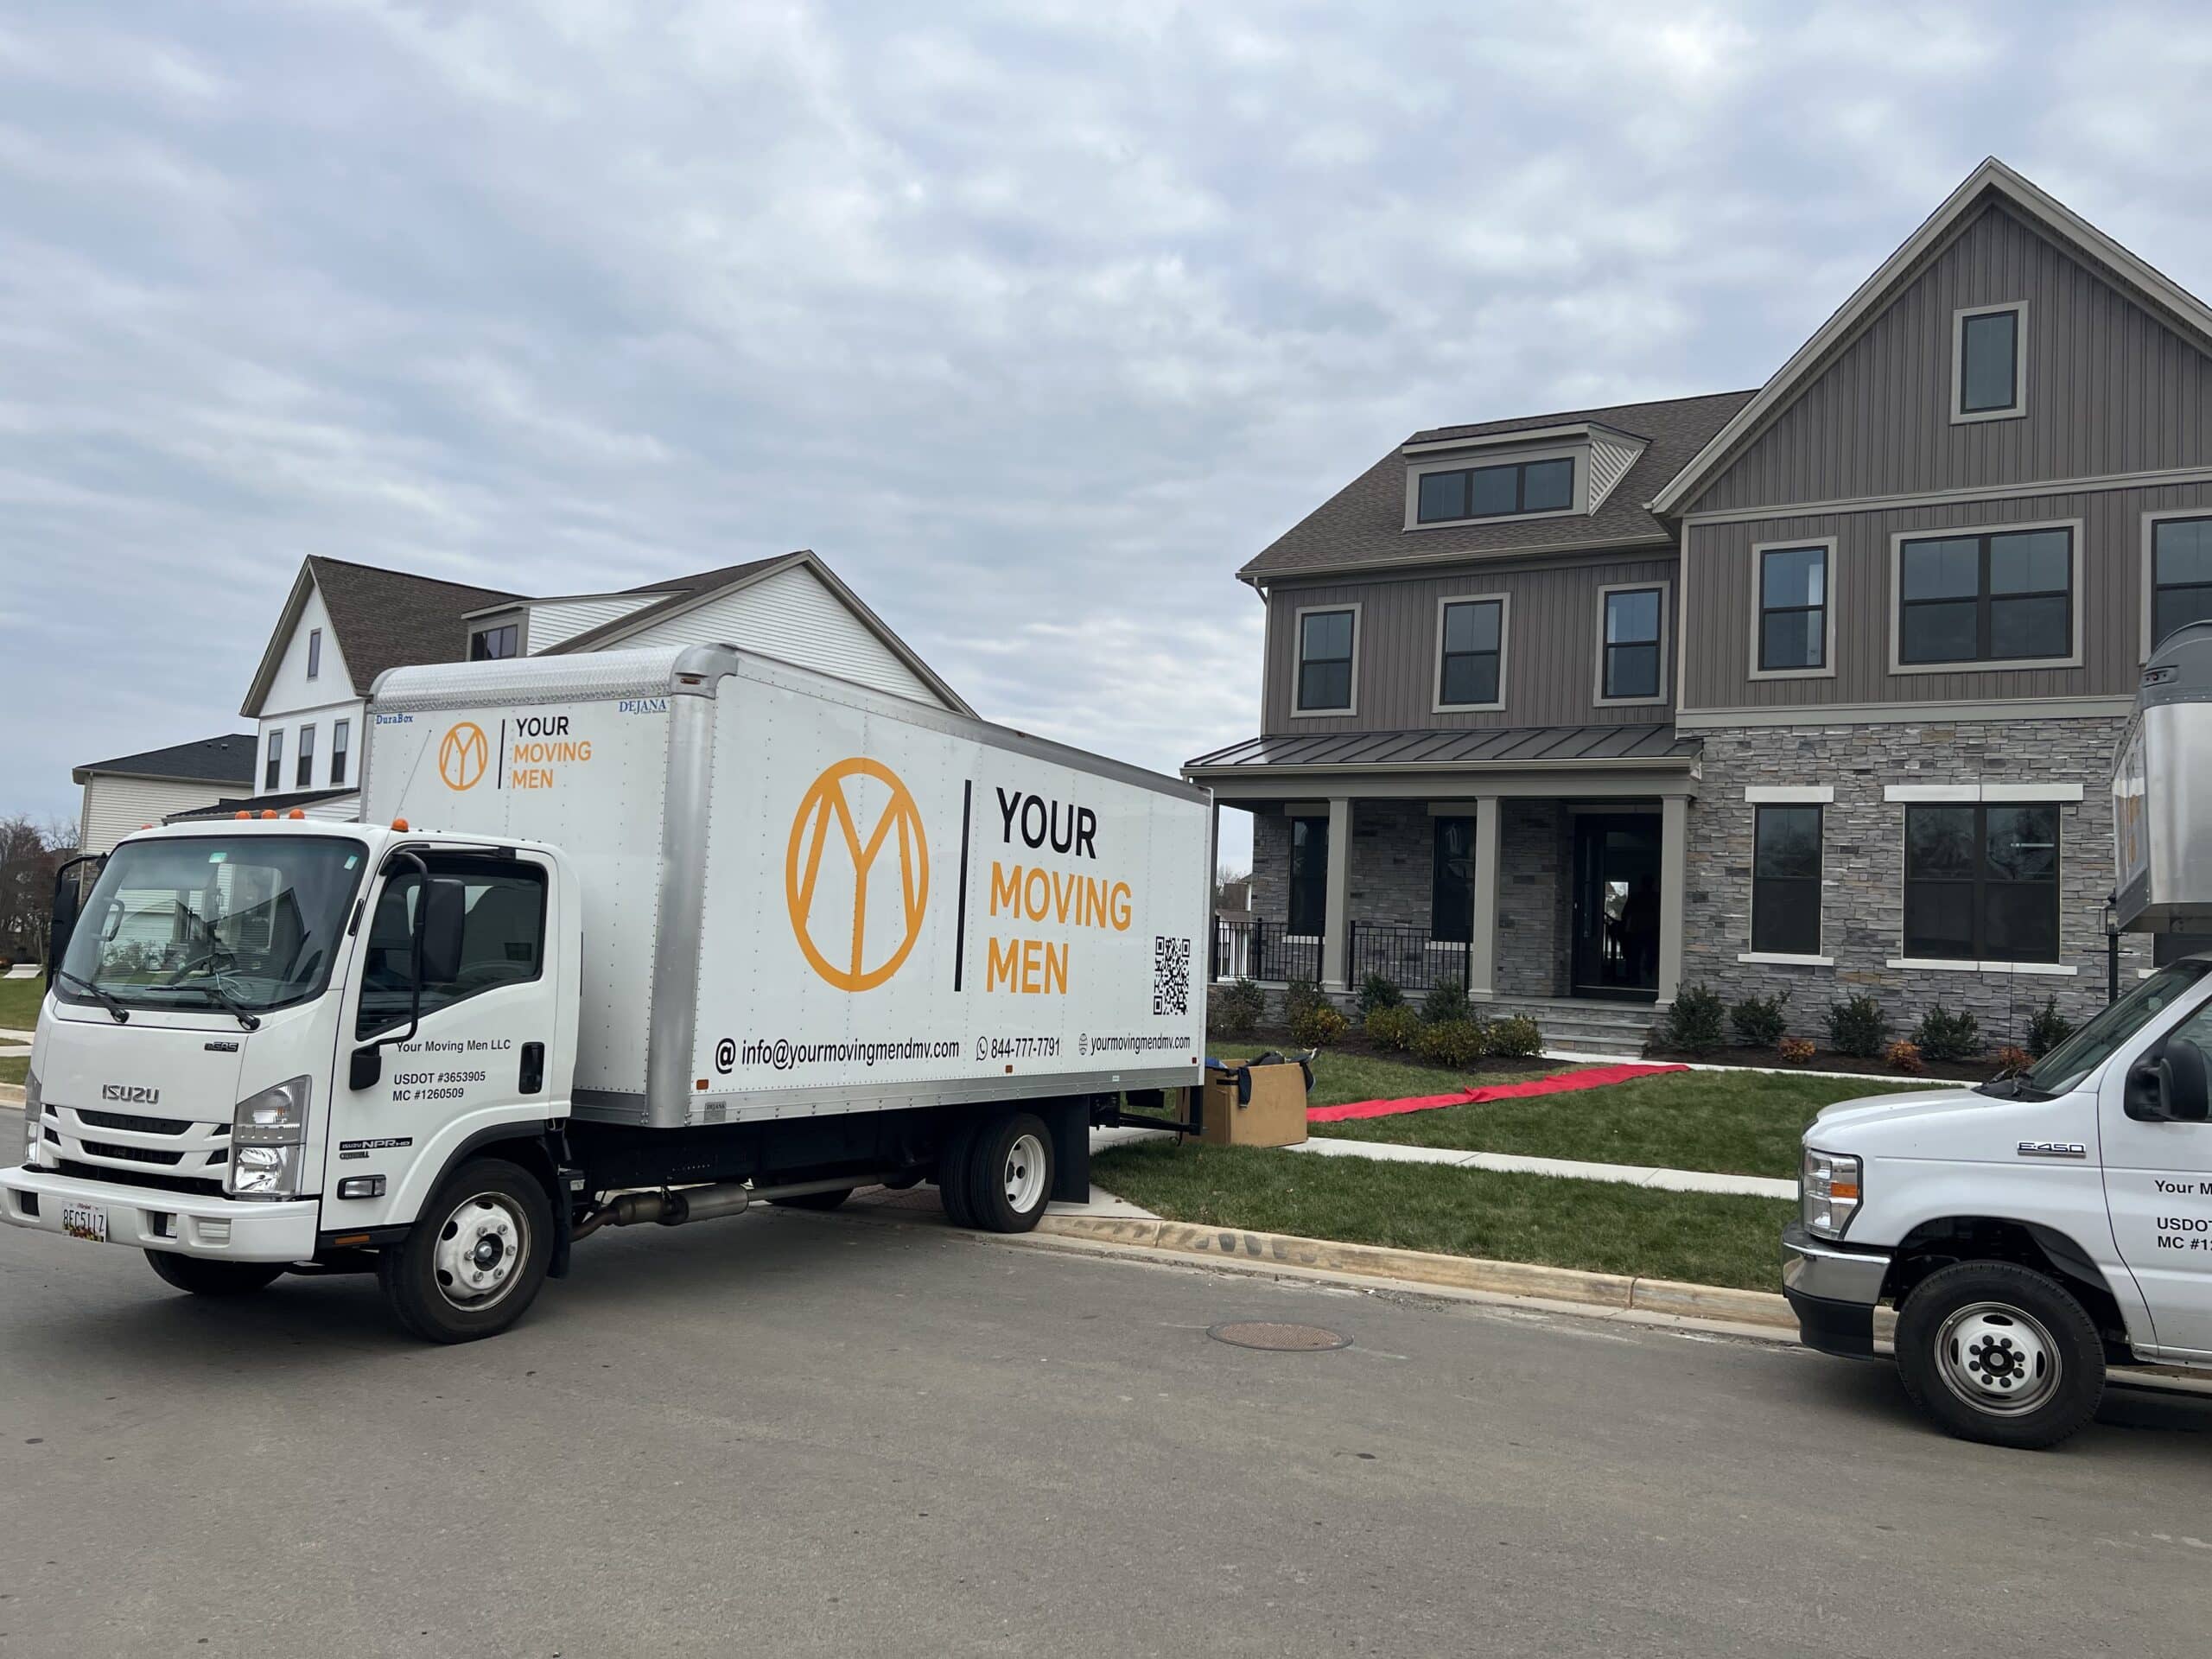 The Best Local Movers You Can Trust